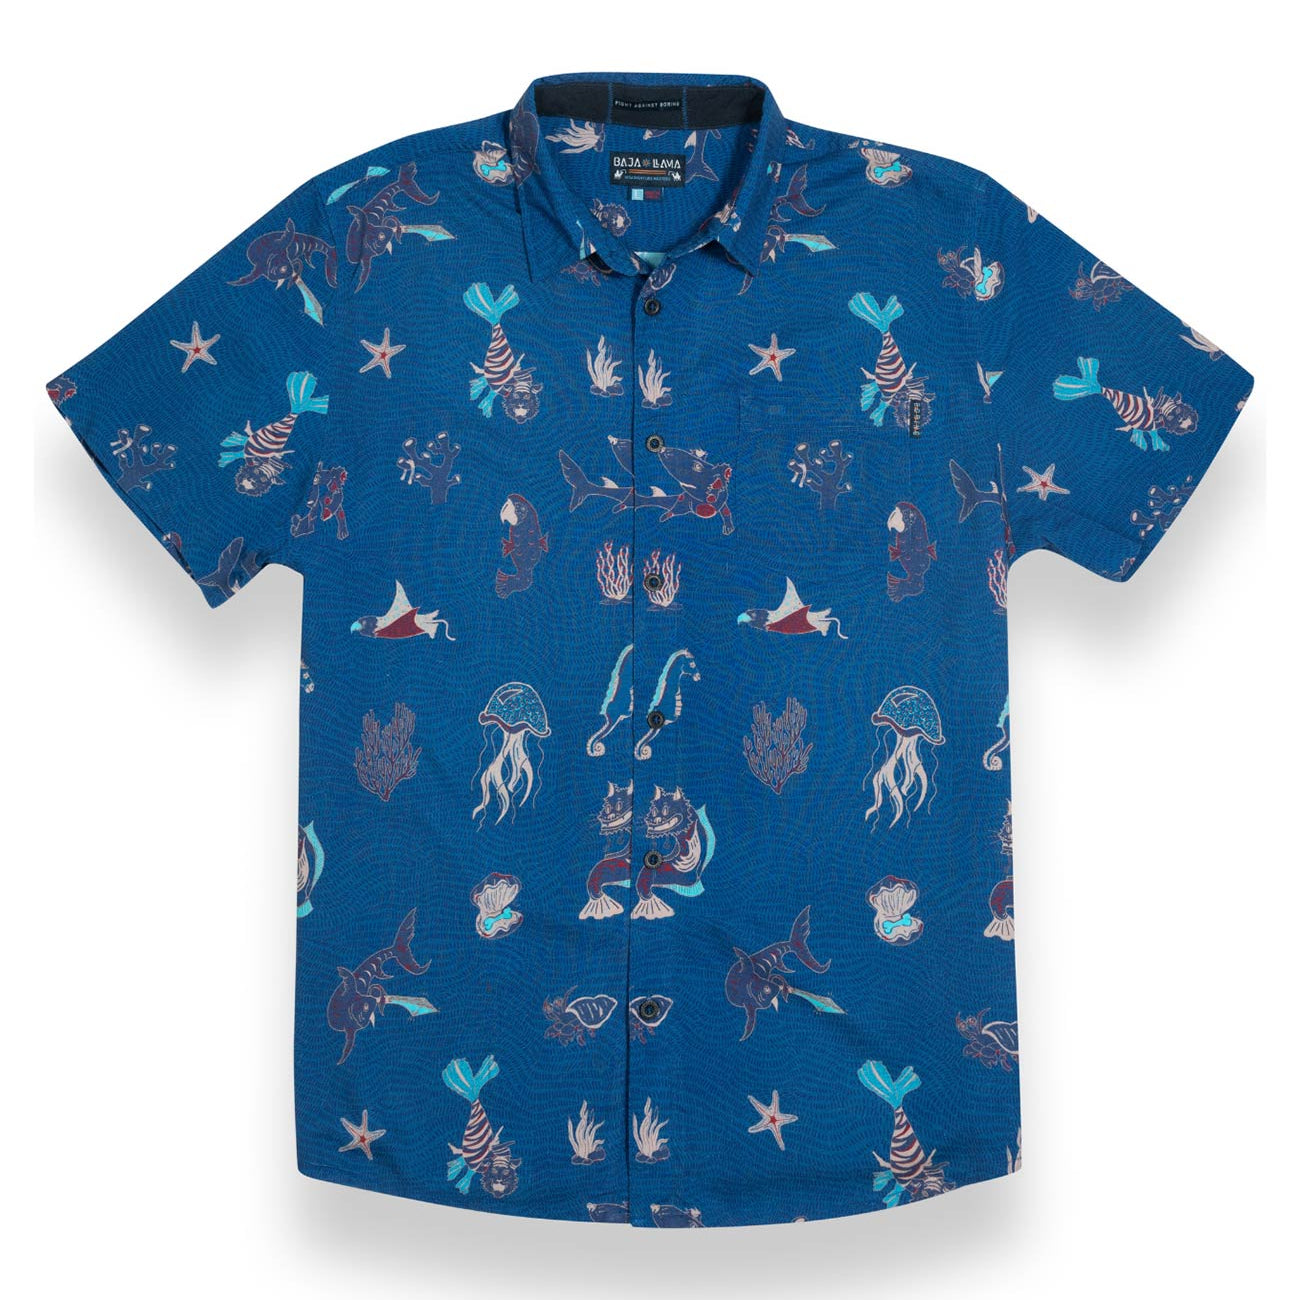 Navy button up shirt featuring ocean animals with split personalities print